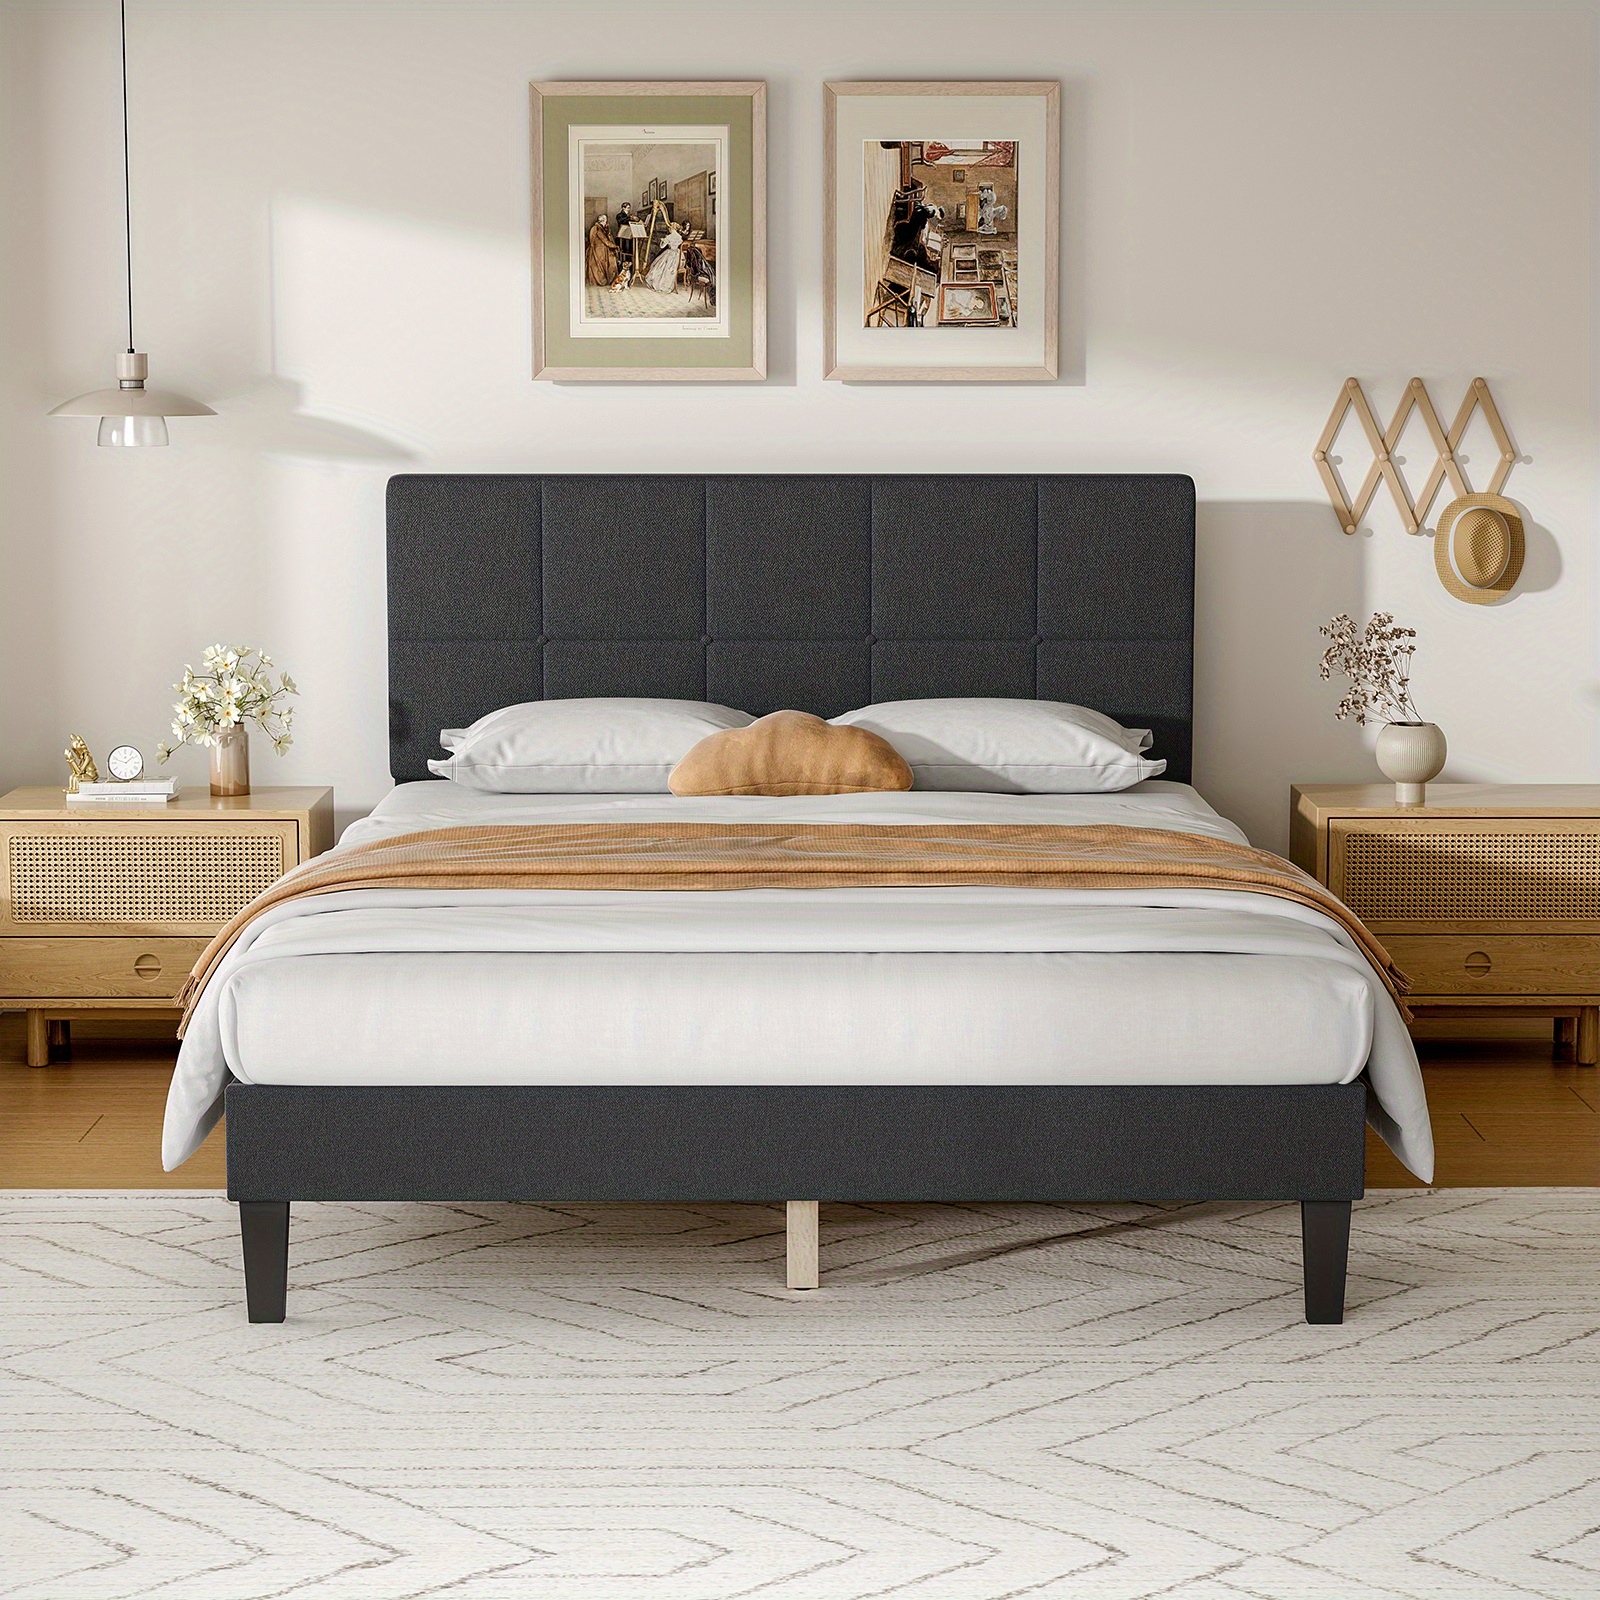 

Puppy Bed Frame With Headboard, No Box Spring Needed, Linen Upholstered Platform Bed Frame With Wood Slats Support, Noise Free, Perfect For A 's Sleep